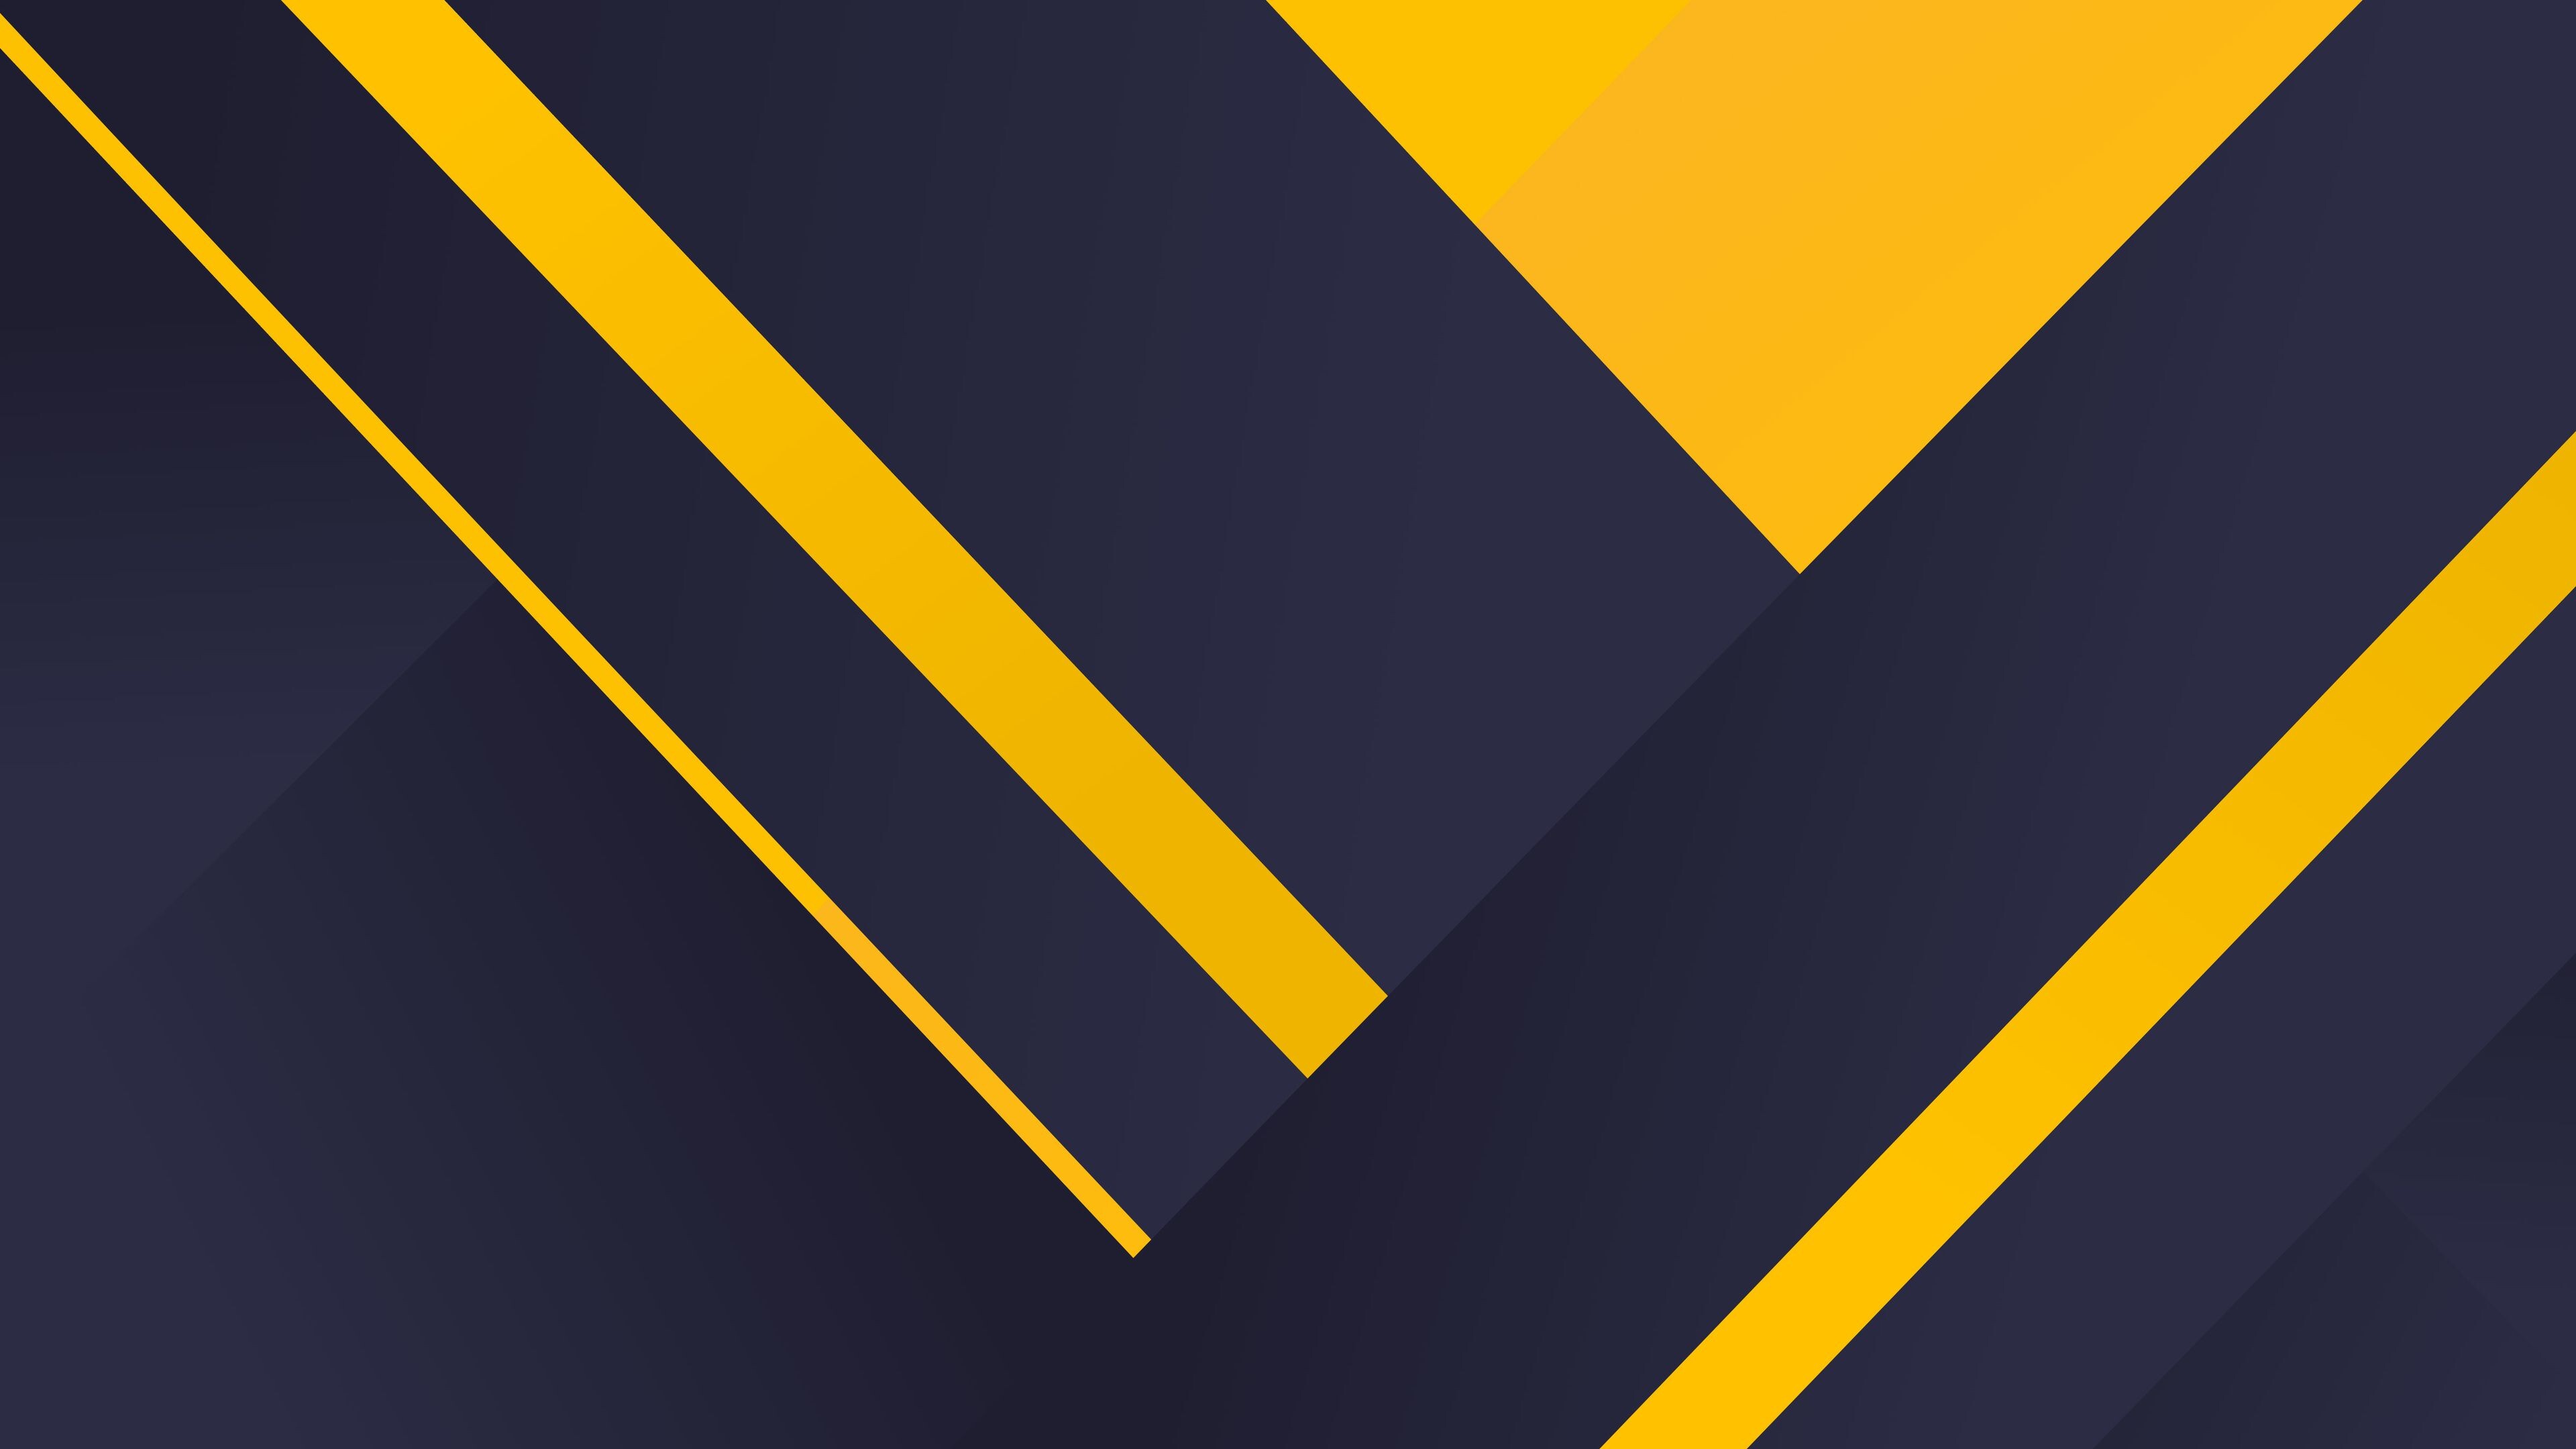 Geometric Abstract: Yellow, Blue, Parallel lines, Two-dimensional space. 3840x2160 4K Background.